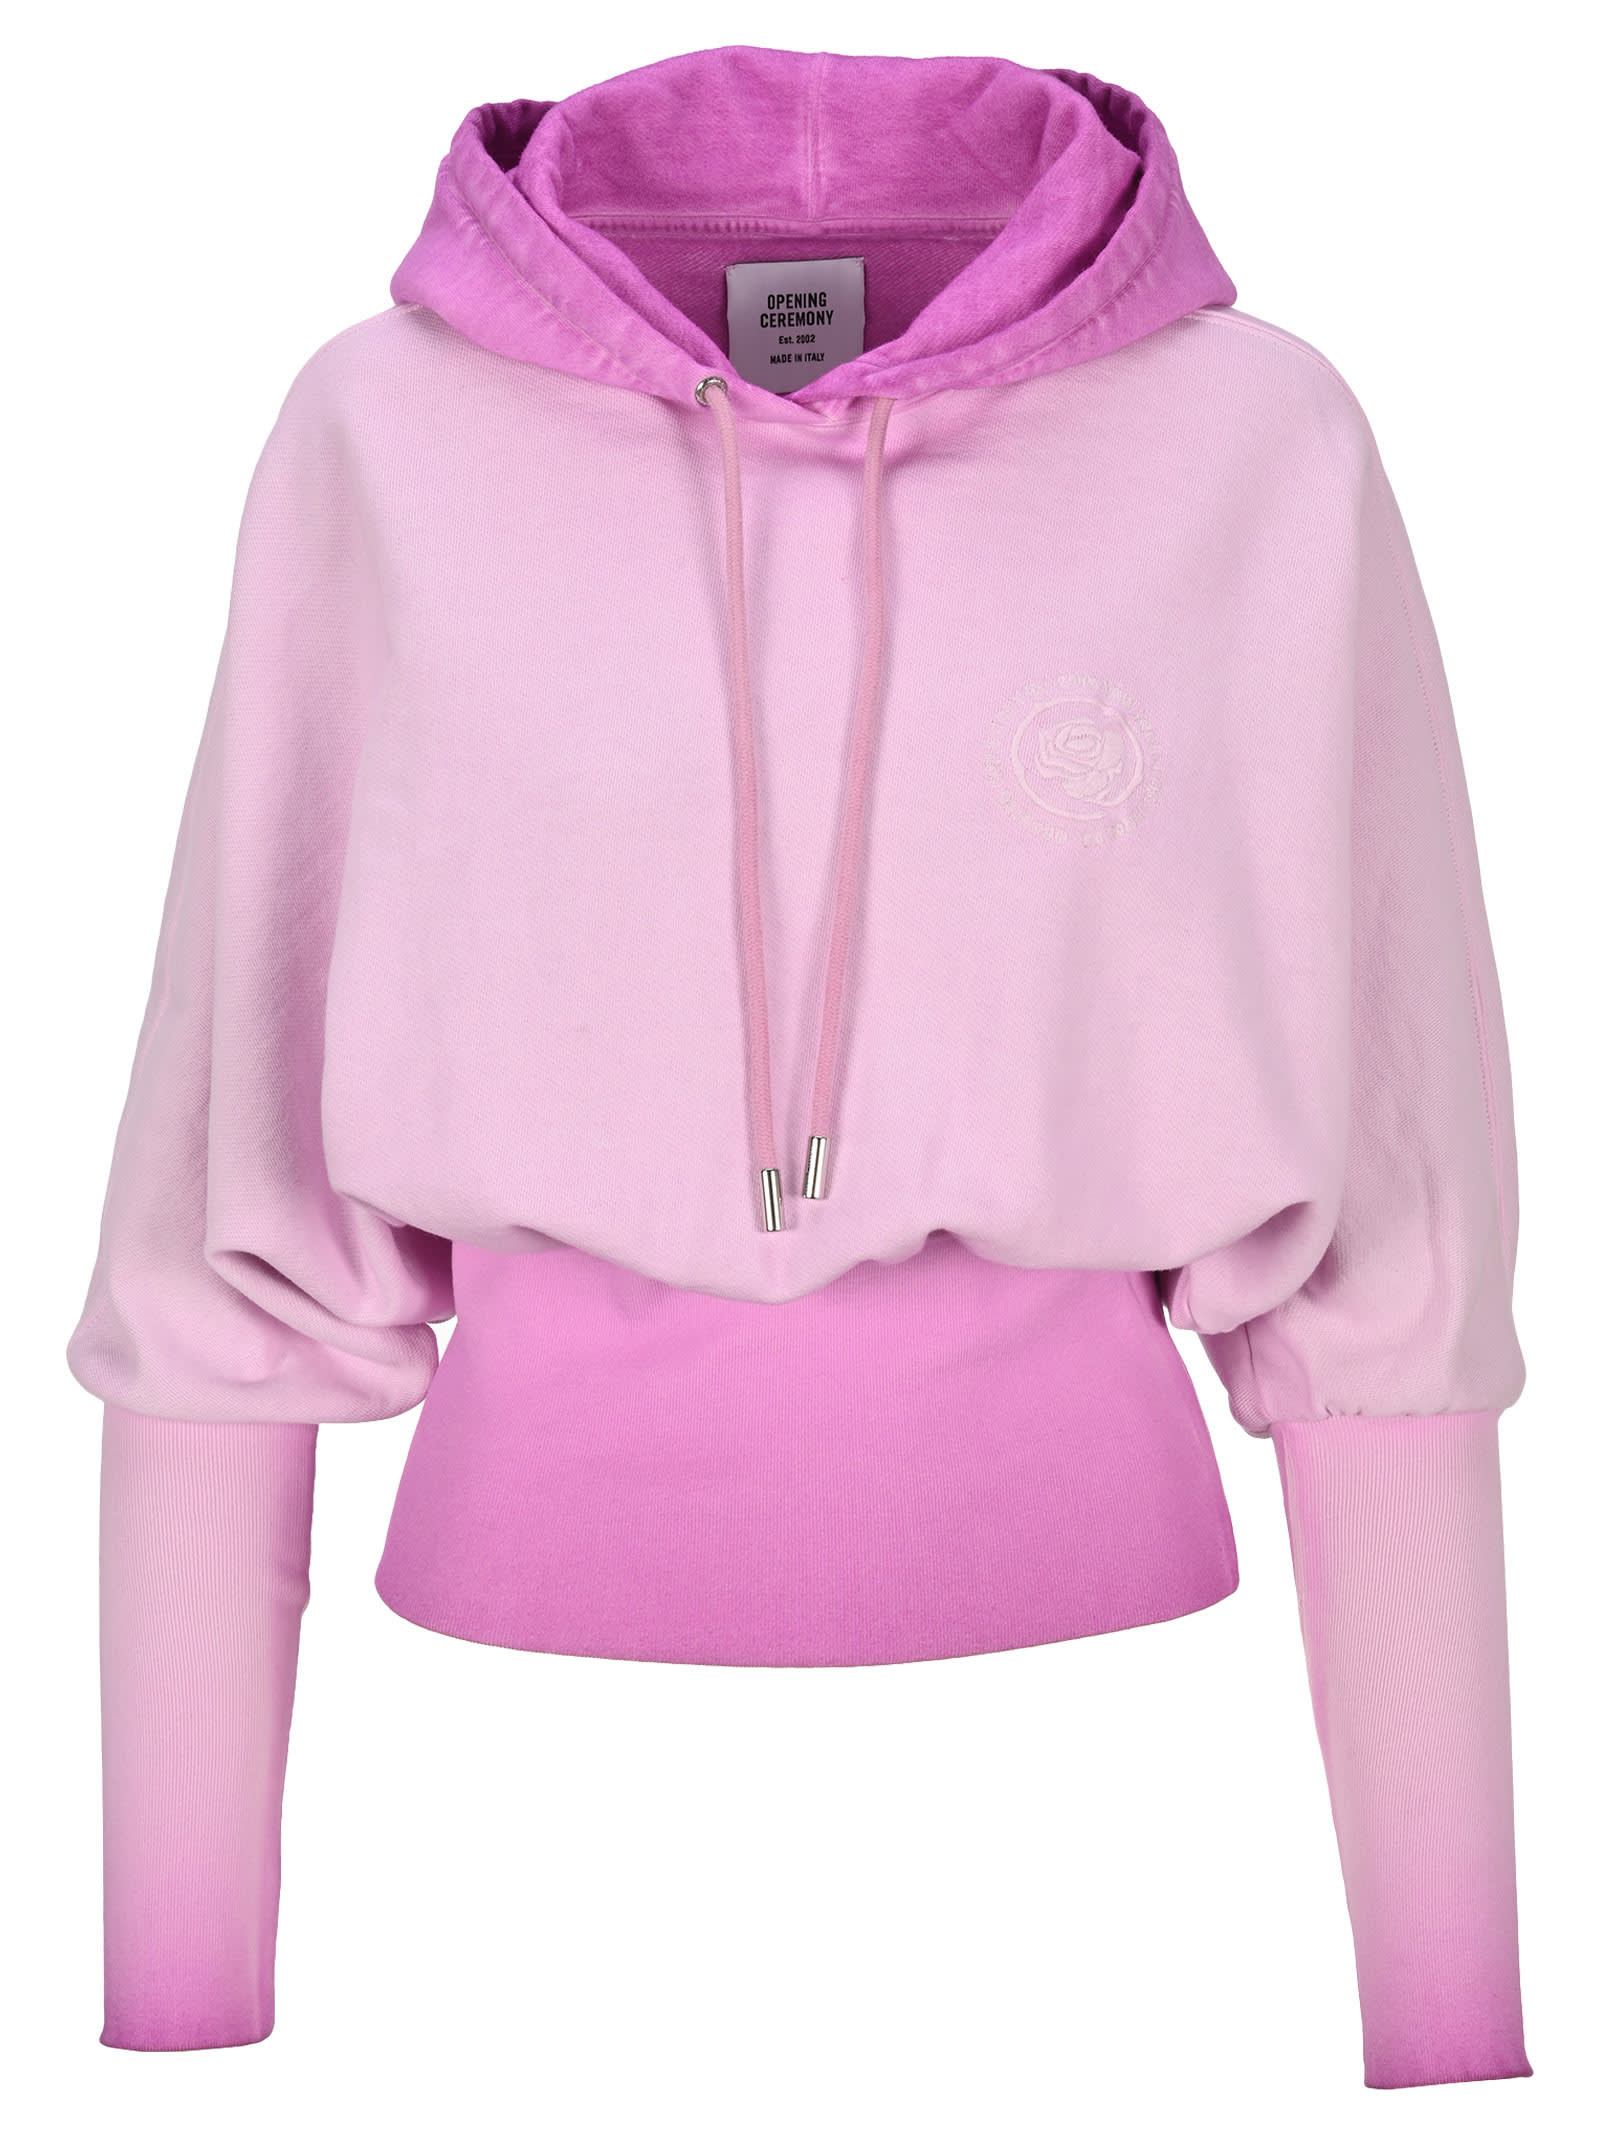 Opening Ceremony ROSE CREST CROPPED HOODIE